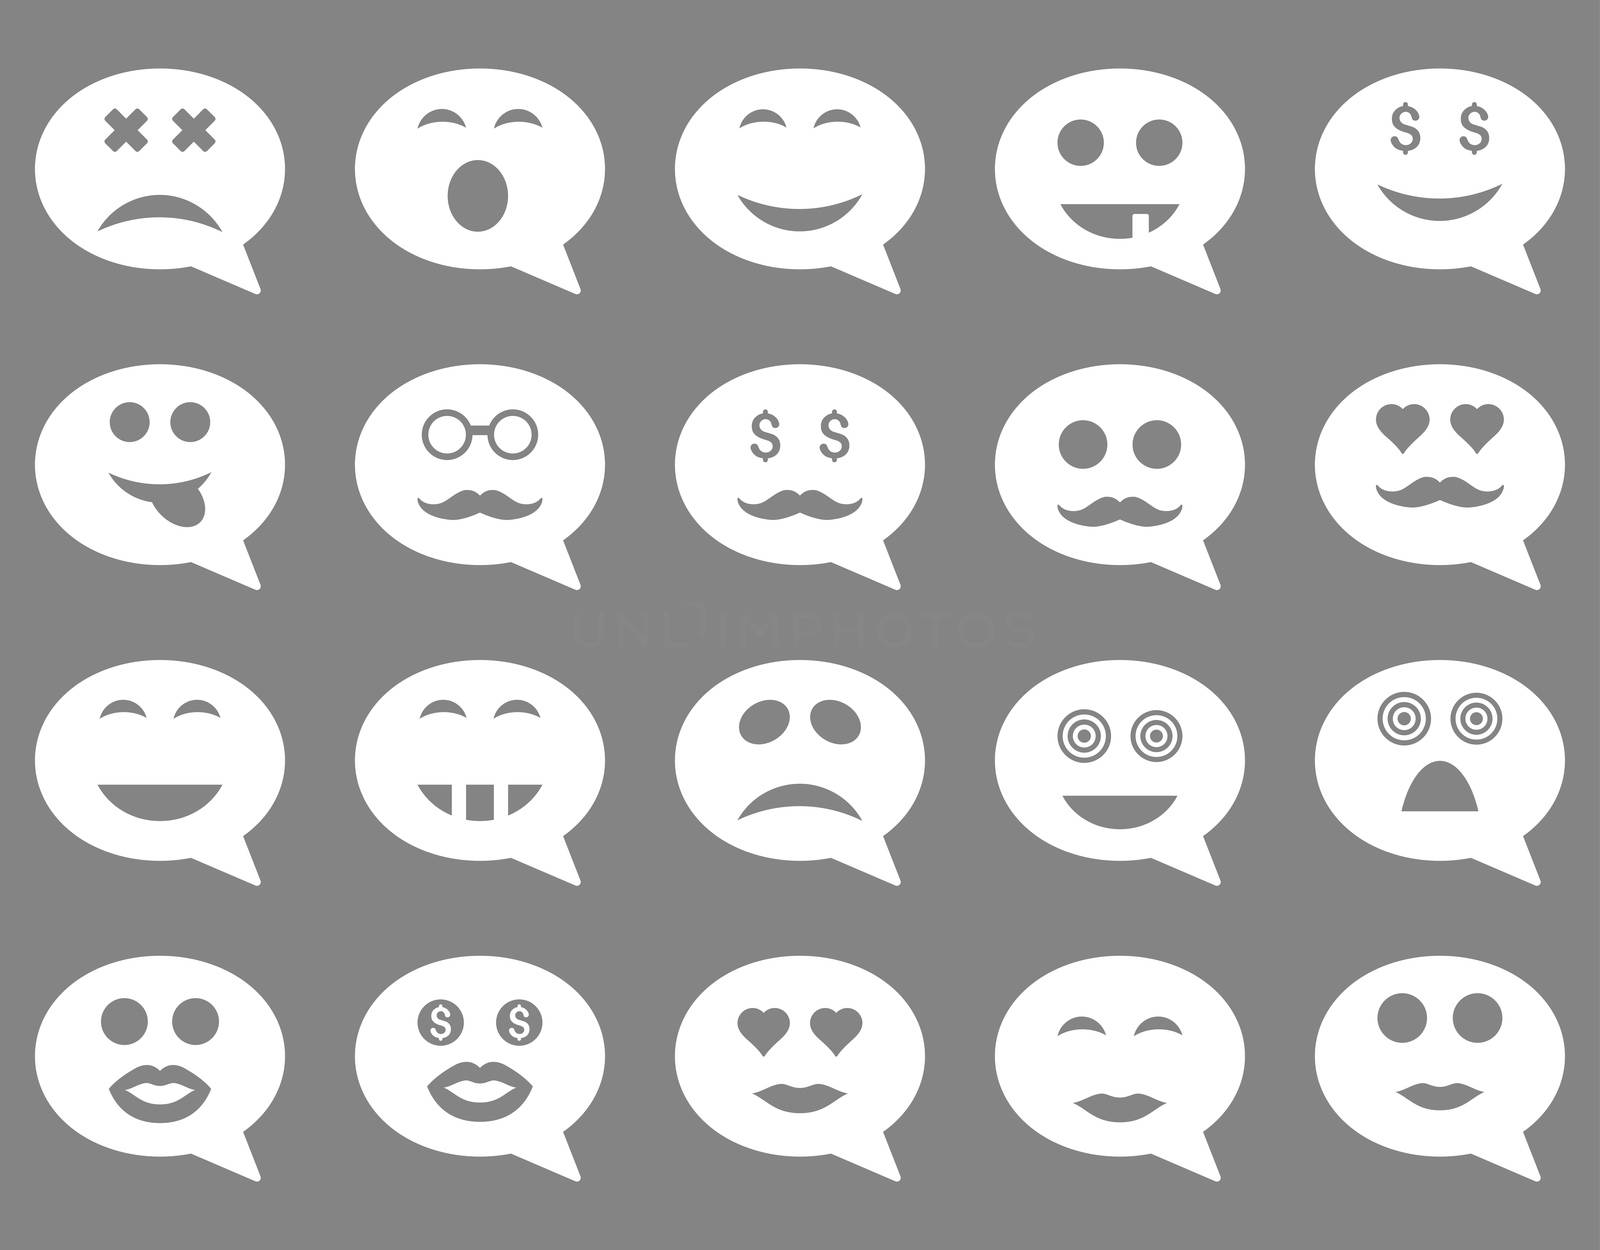 Chat emotion smile icons. Glyph set style is flat images, white symbols, isolated on a gray background.